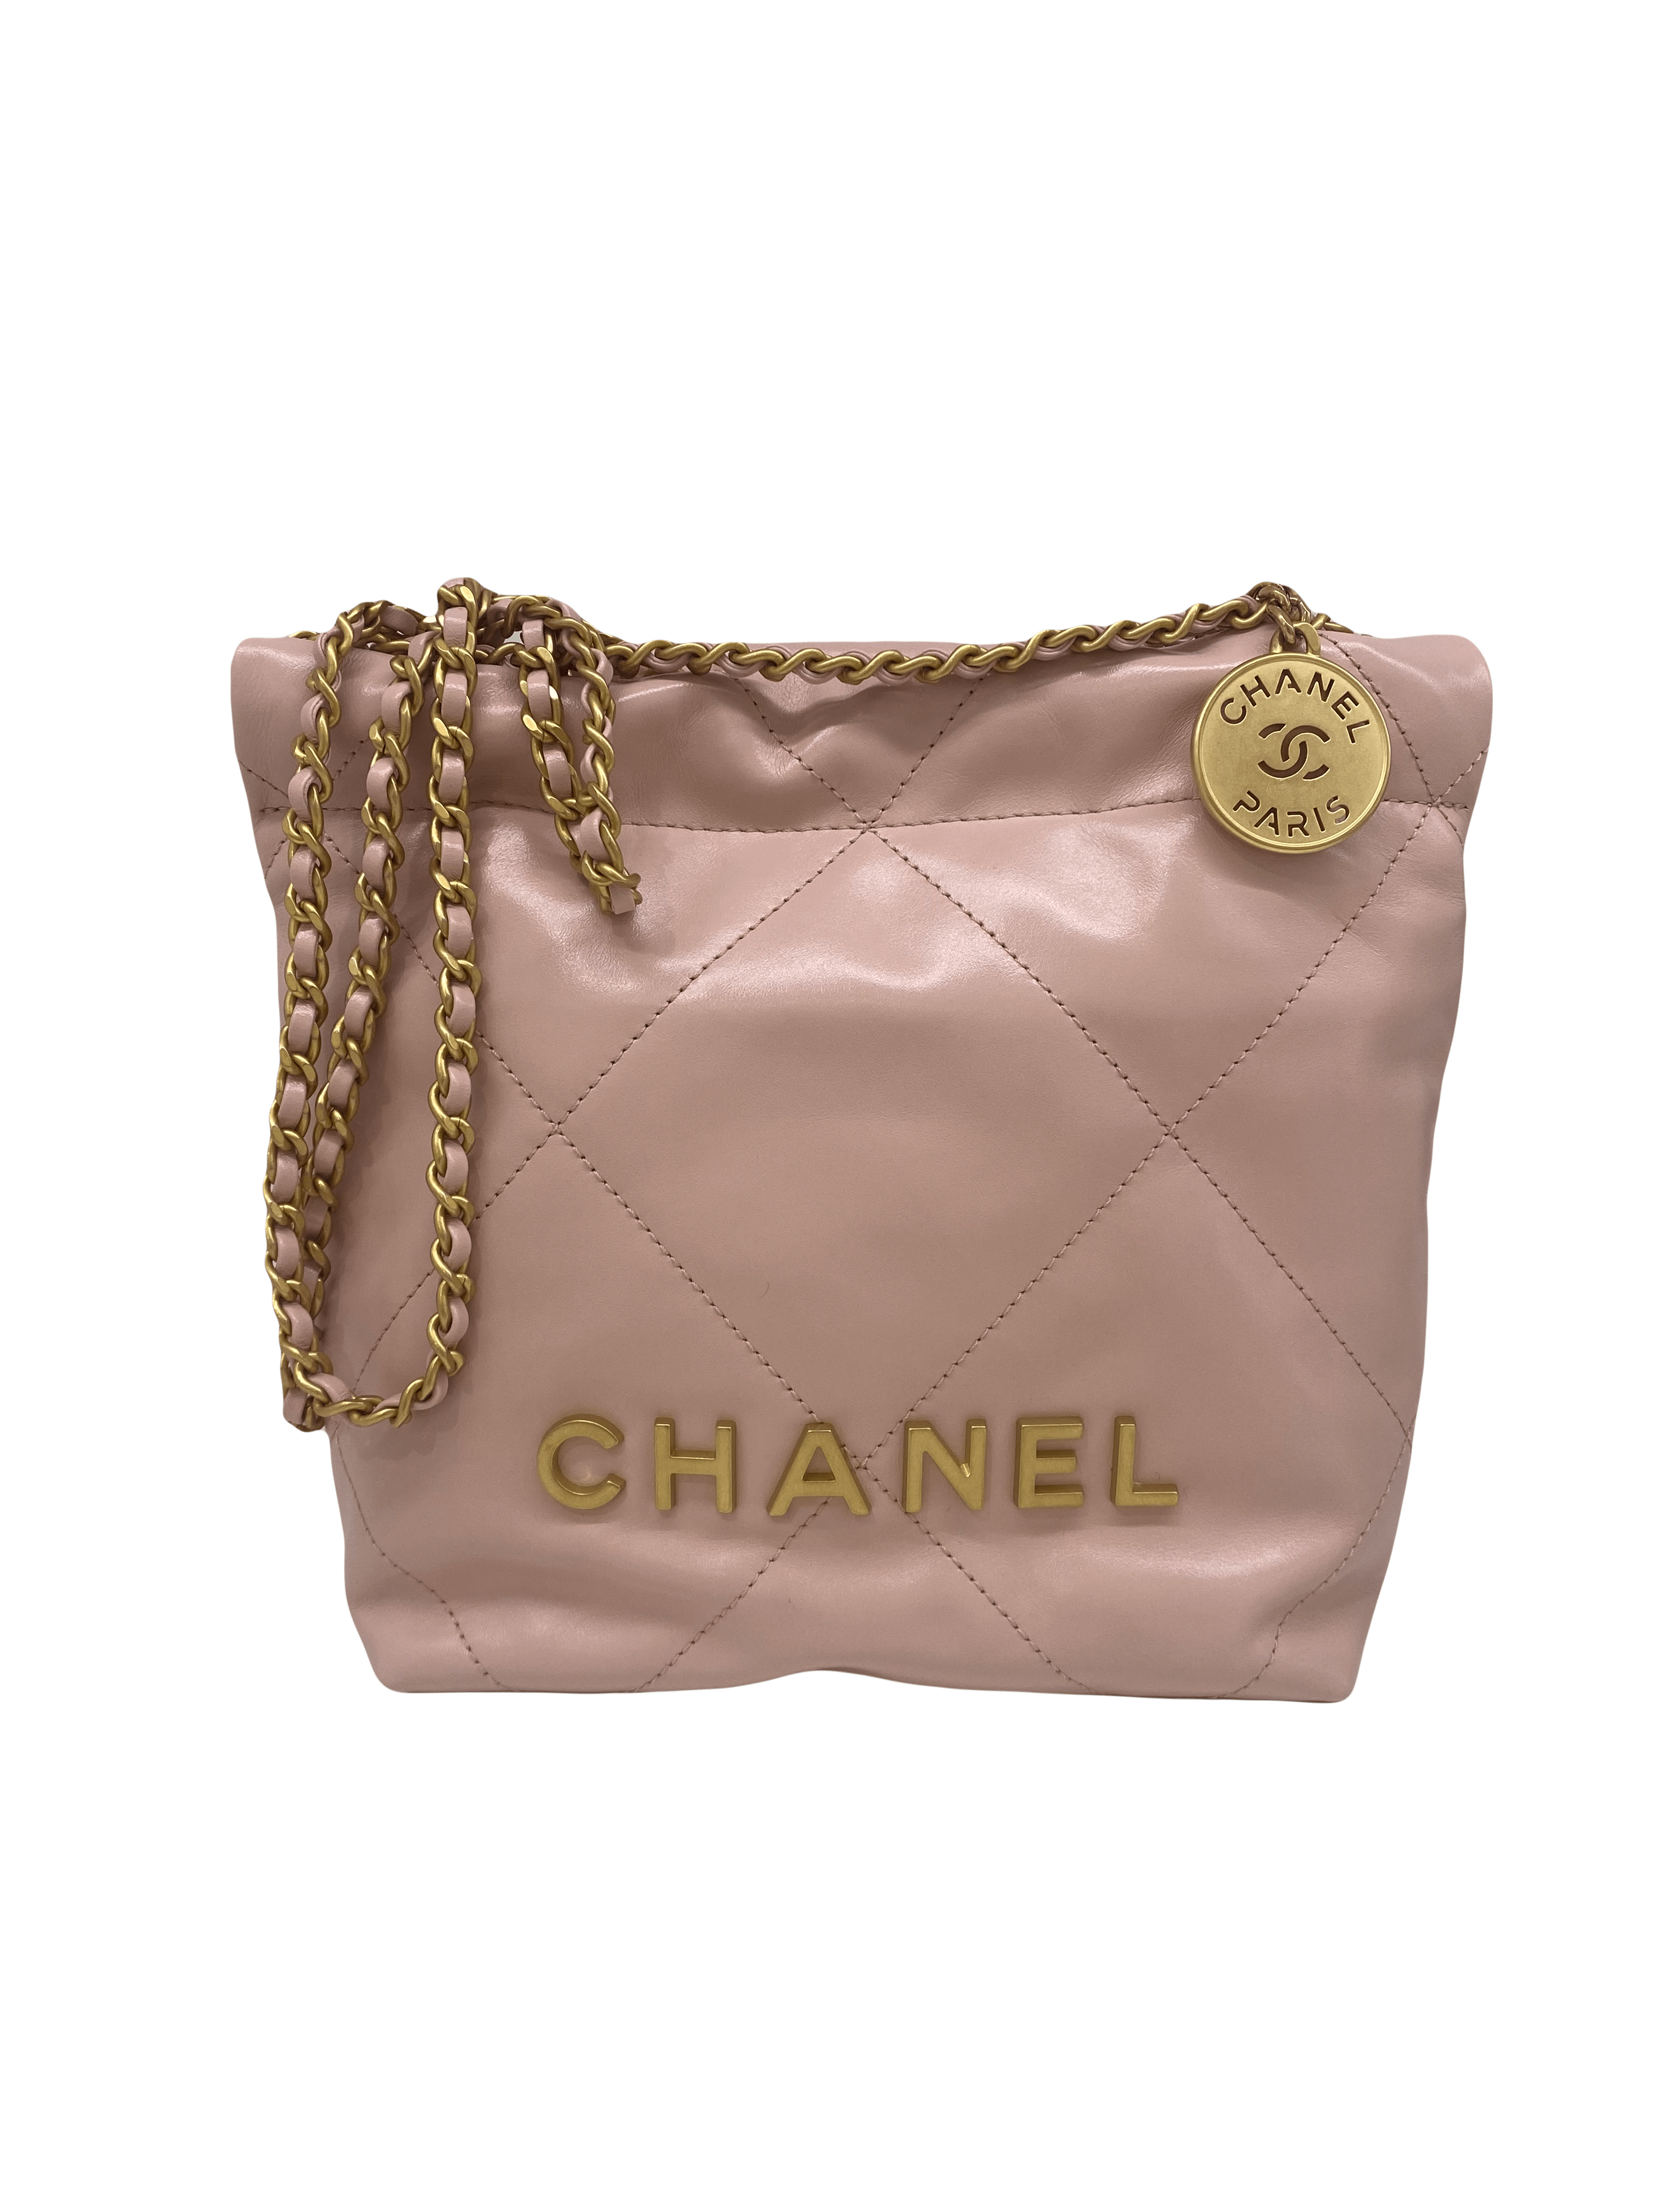 CHANEL Shiny Calfskin Quilted Chanel 22 Drawstring Bag Coral Pink 1230359